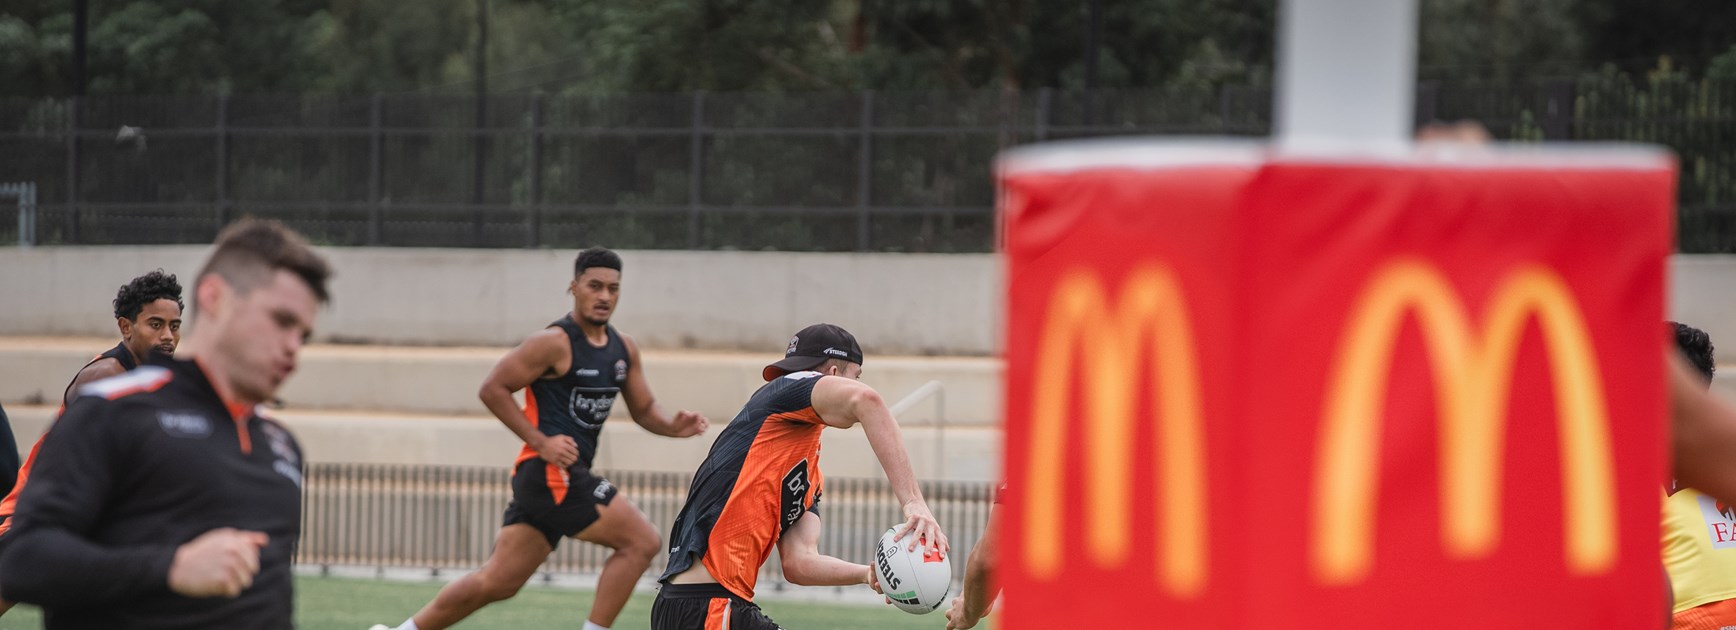 Wests Tigers announce new partnership with Macca's